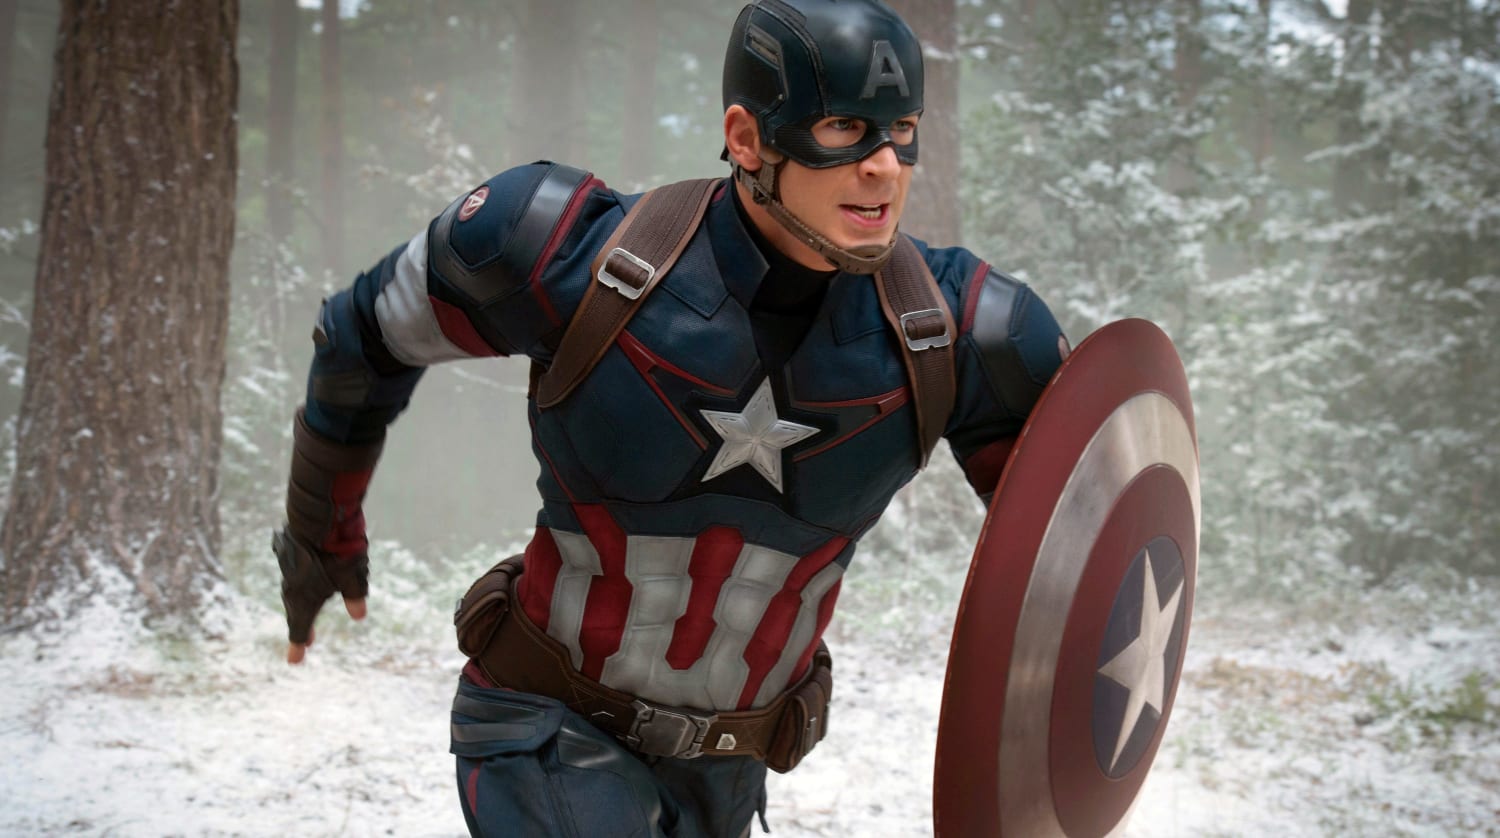 Chris Evans reveals he almost turned down 'Captain America' over anxiety